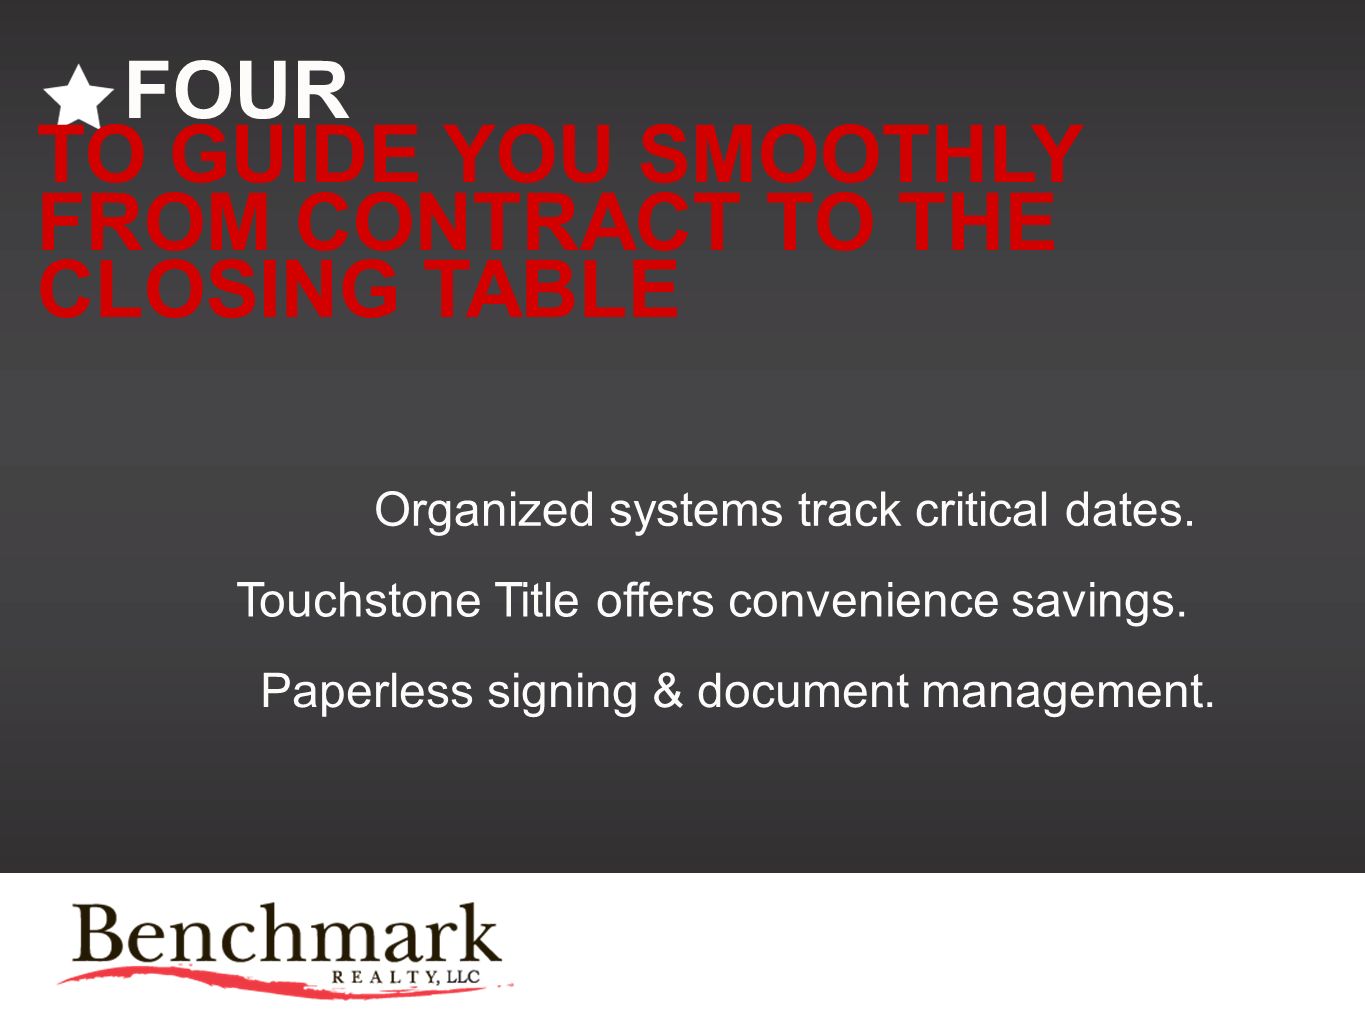 FOUR TO GUIDE YOU SMOOTHLY FROM CONTRACT TO THE CLOSING TABLE Organized systems track critical dates.